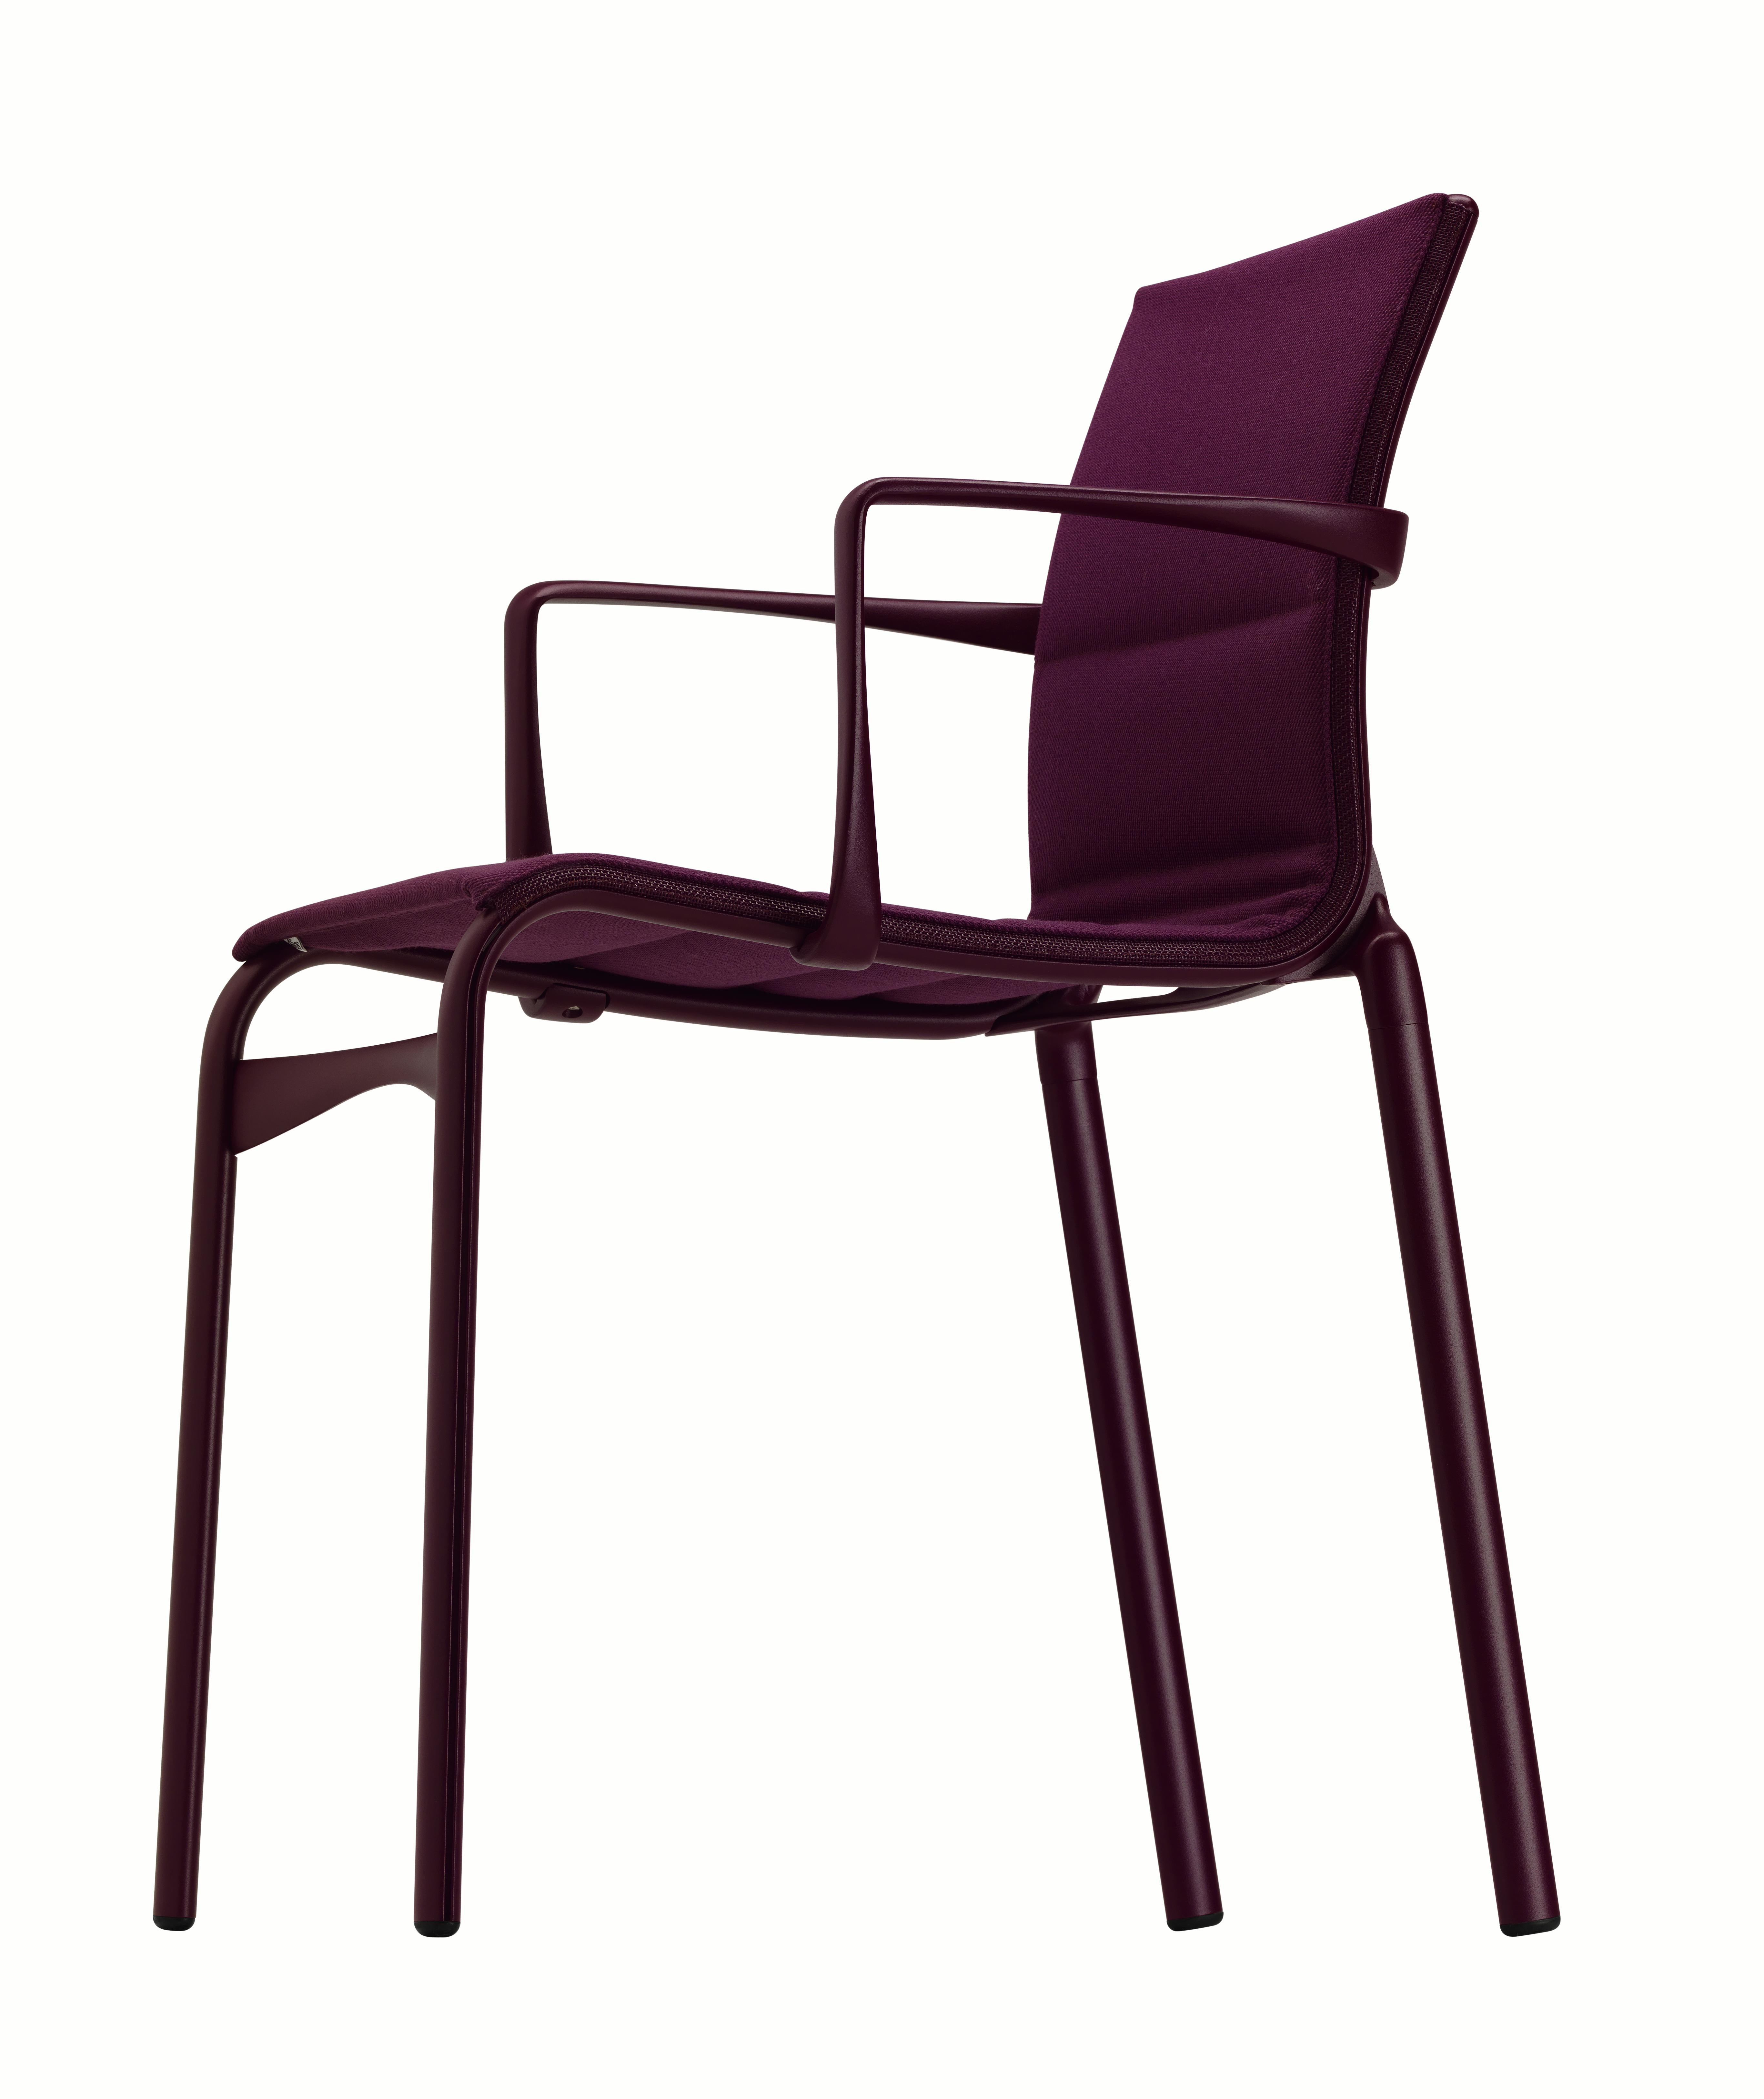 Alias 417 Highframe 40 Chair in Purple with Aubergine Lacquered Aluminium Frame by Alberto Meda

Stacking chair with arms, structure composed of extruded aluminium profile and die-cast aluminium elements. Seat and back in fire retardant PVC